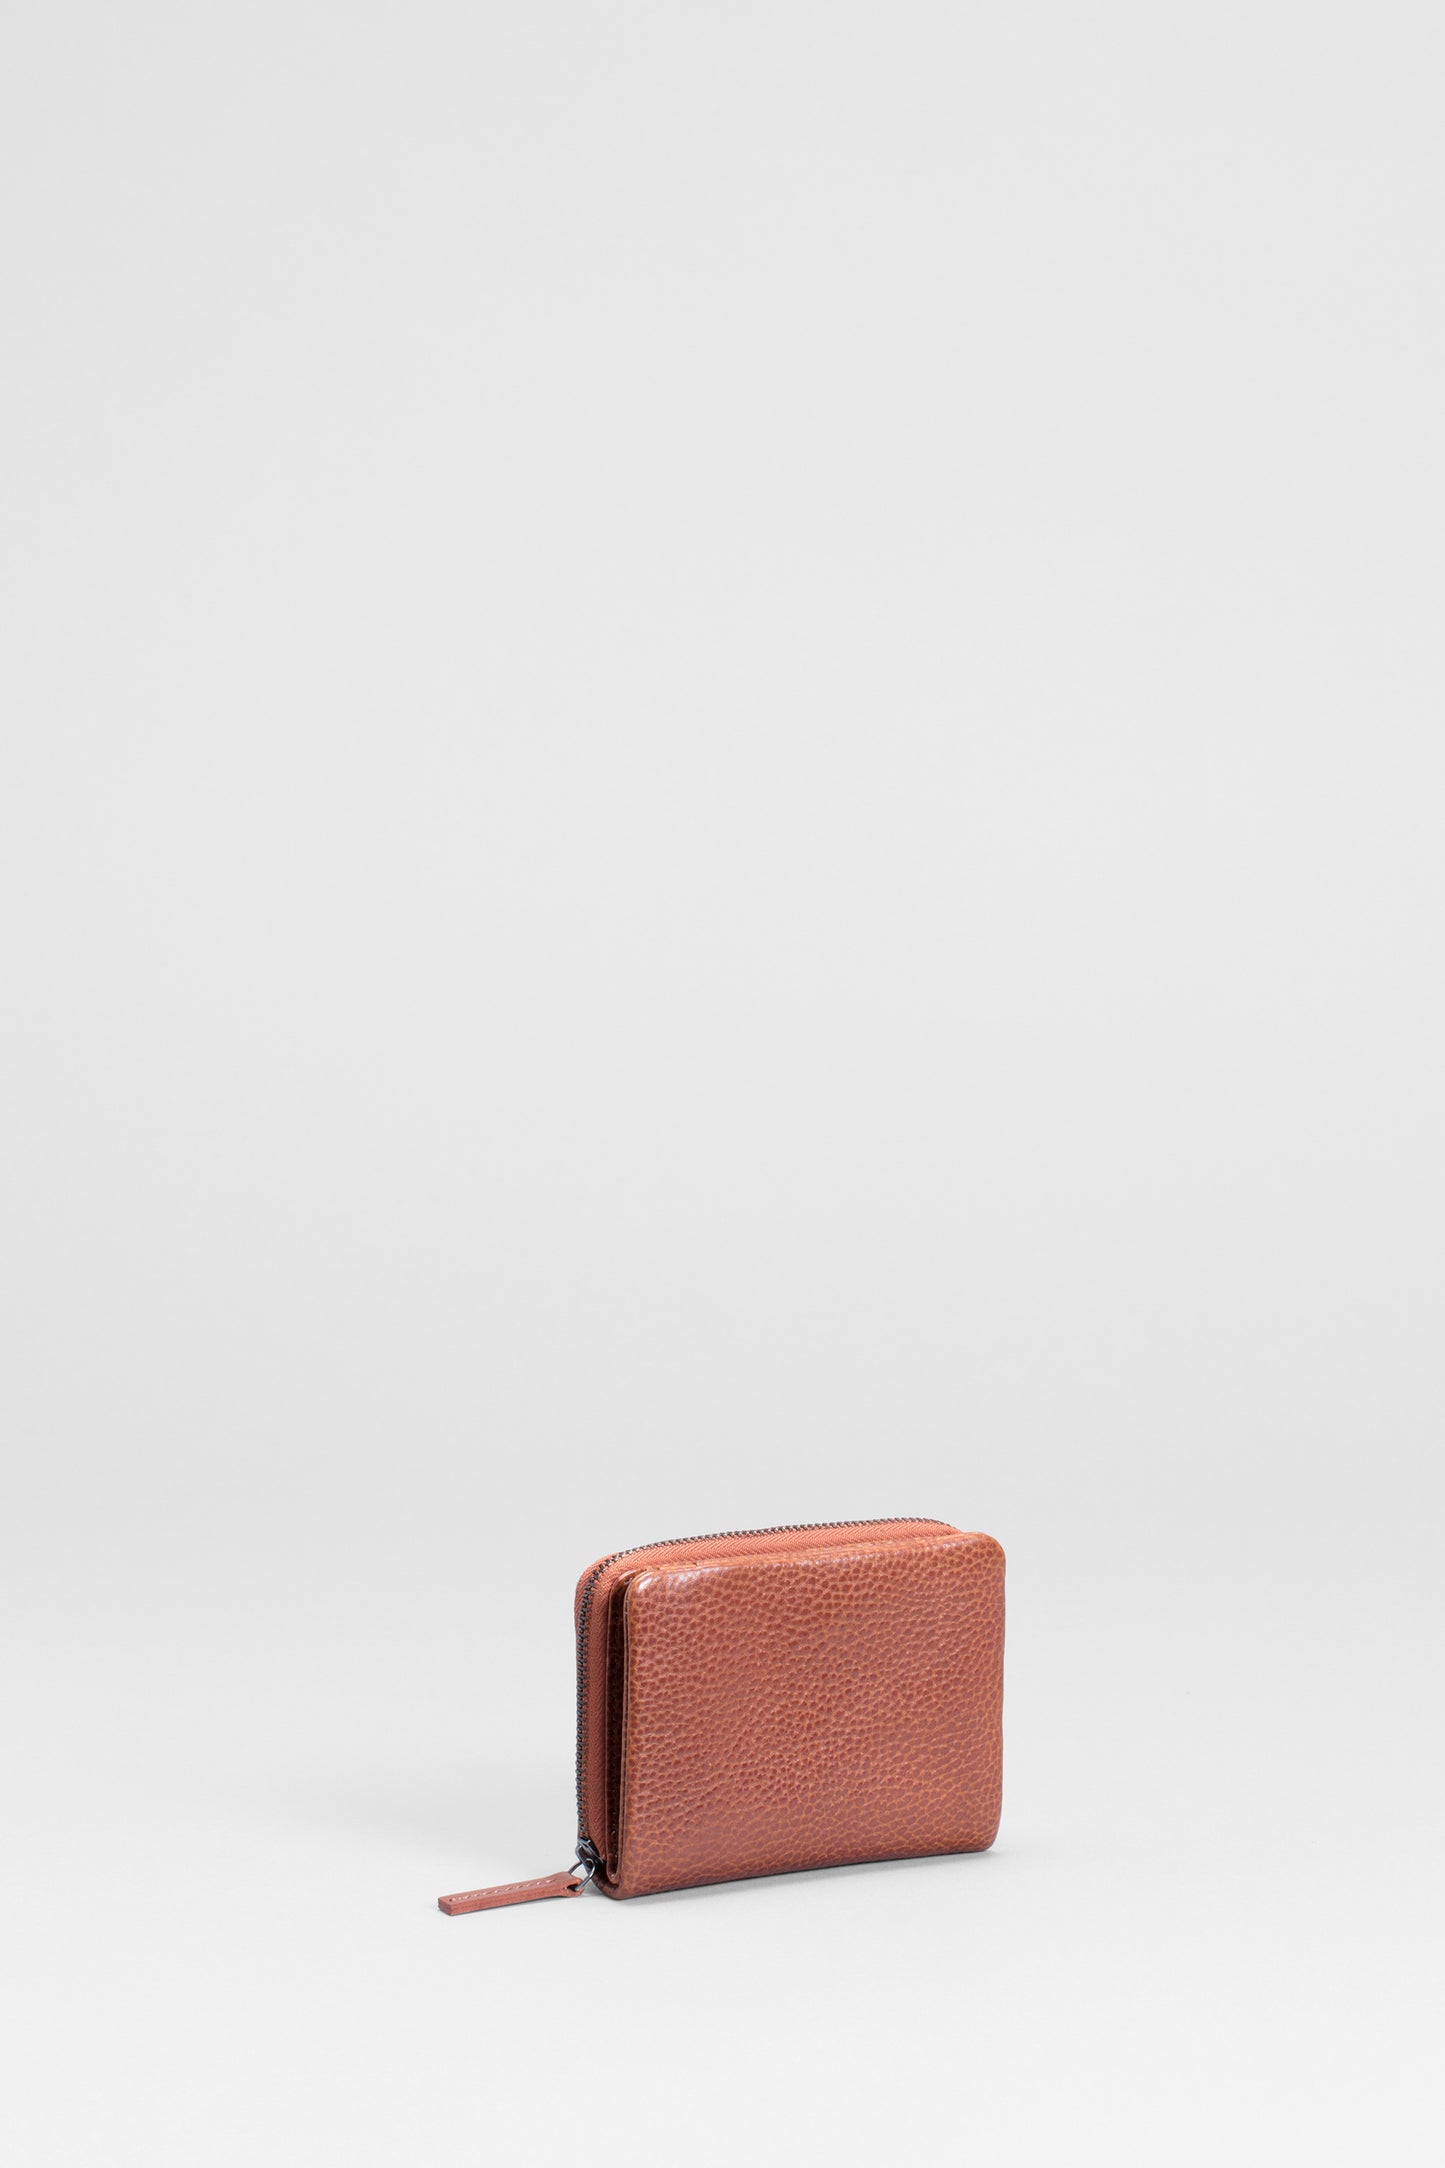 Canutte Leather Wallet Front | TAN / TAN